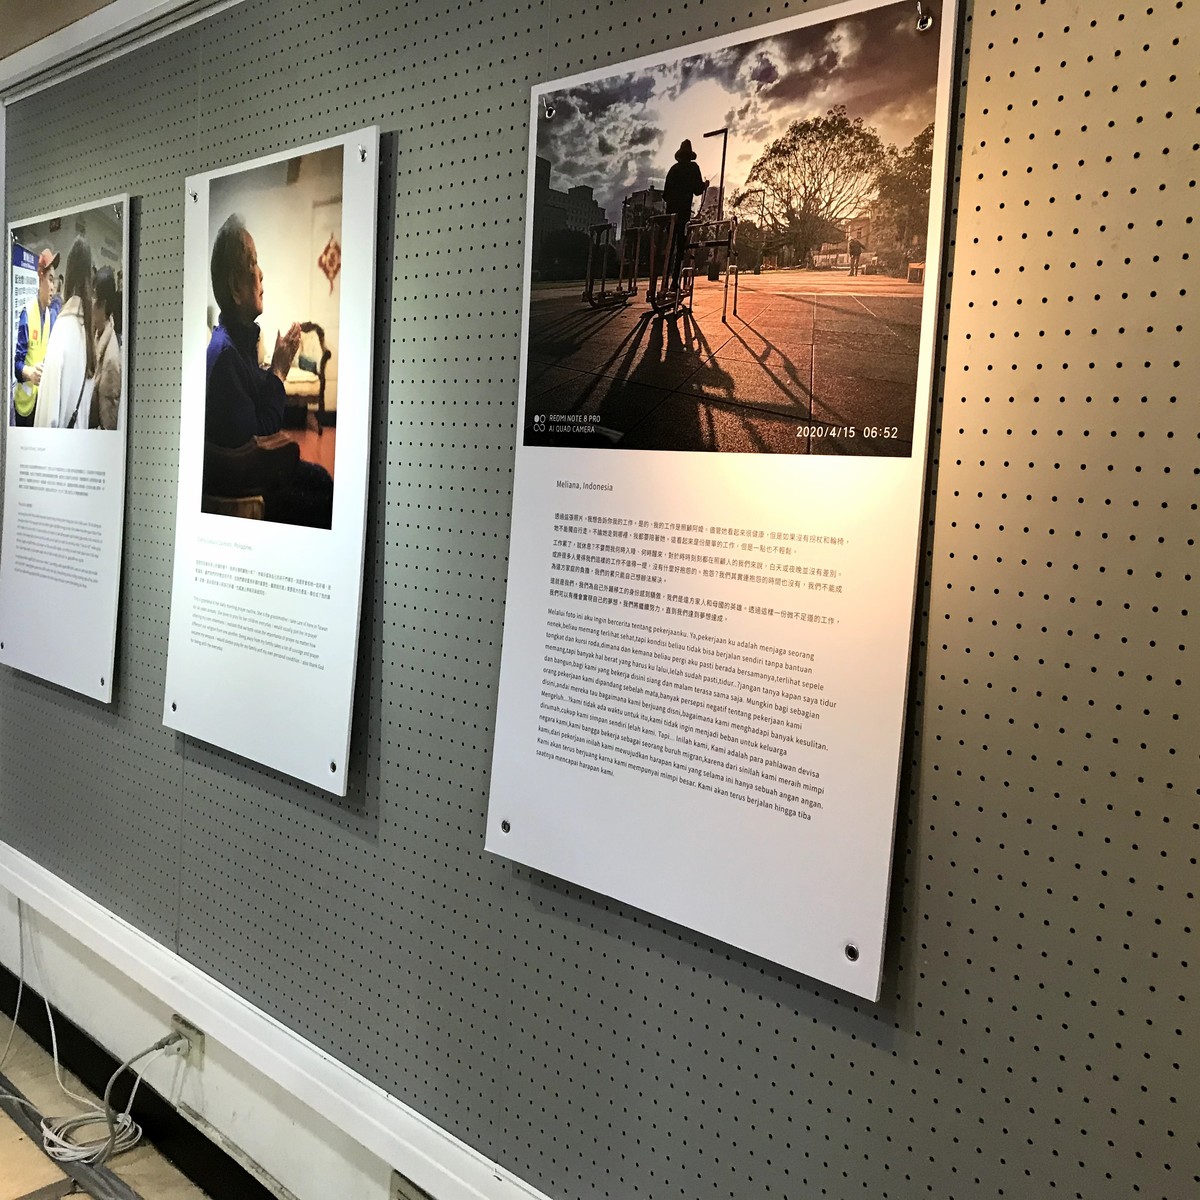 NSYSU hosts exhibition on migrant workers’ life stories